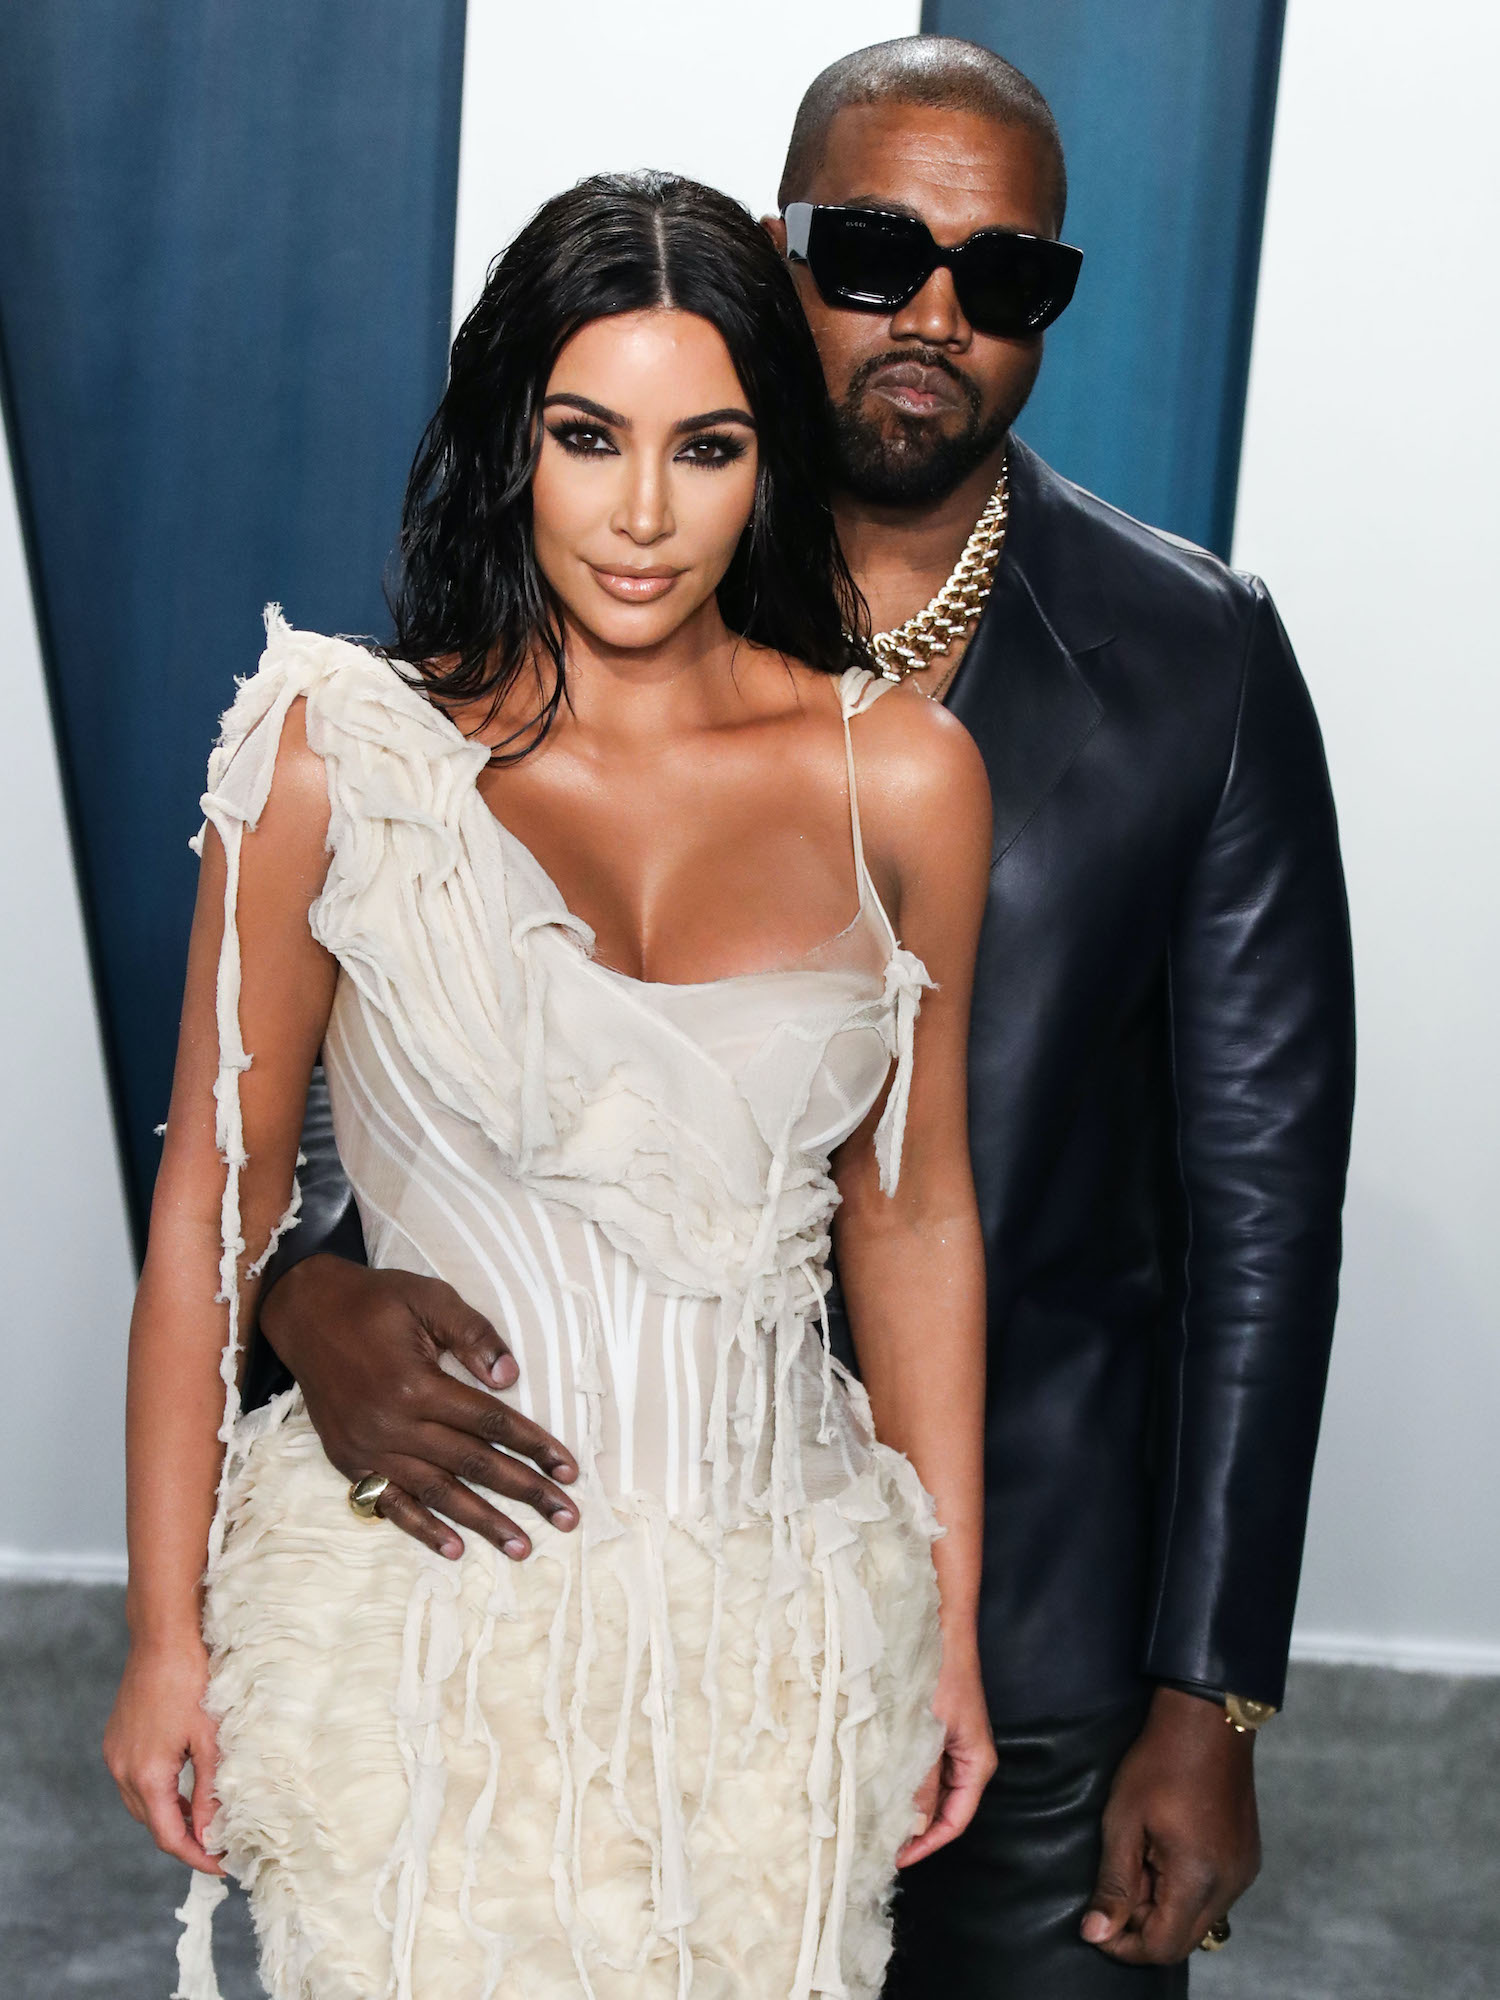 Kim K: Kanye West Makes a ‘Supportive Coparenting’ Dynamic ‘Impossible’